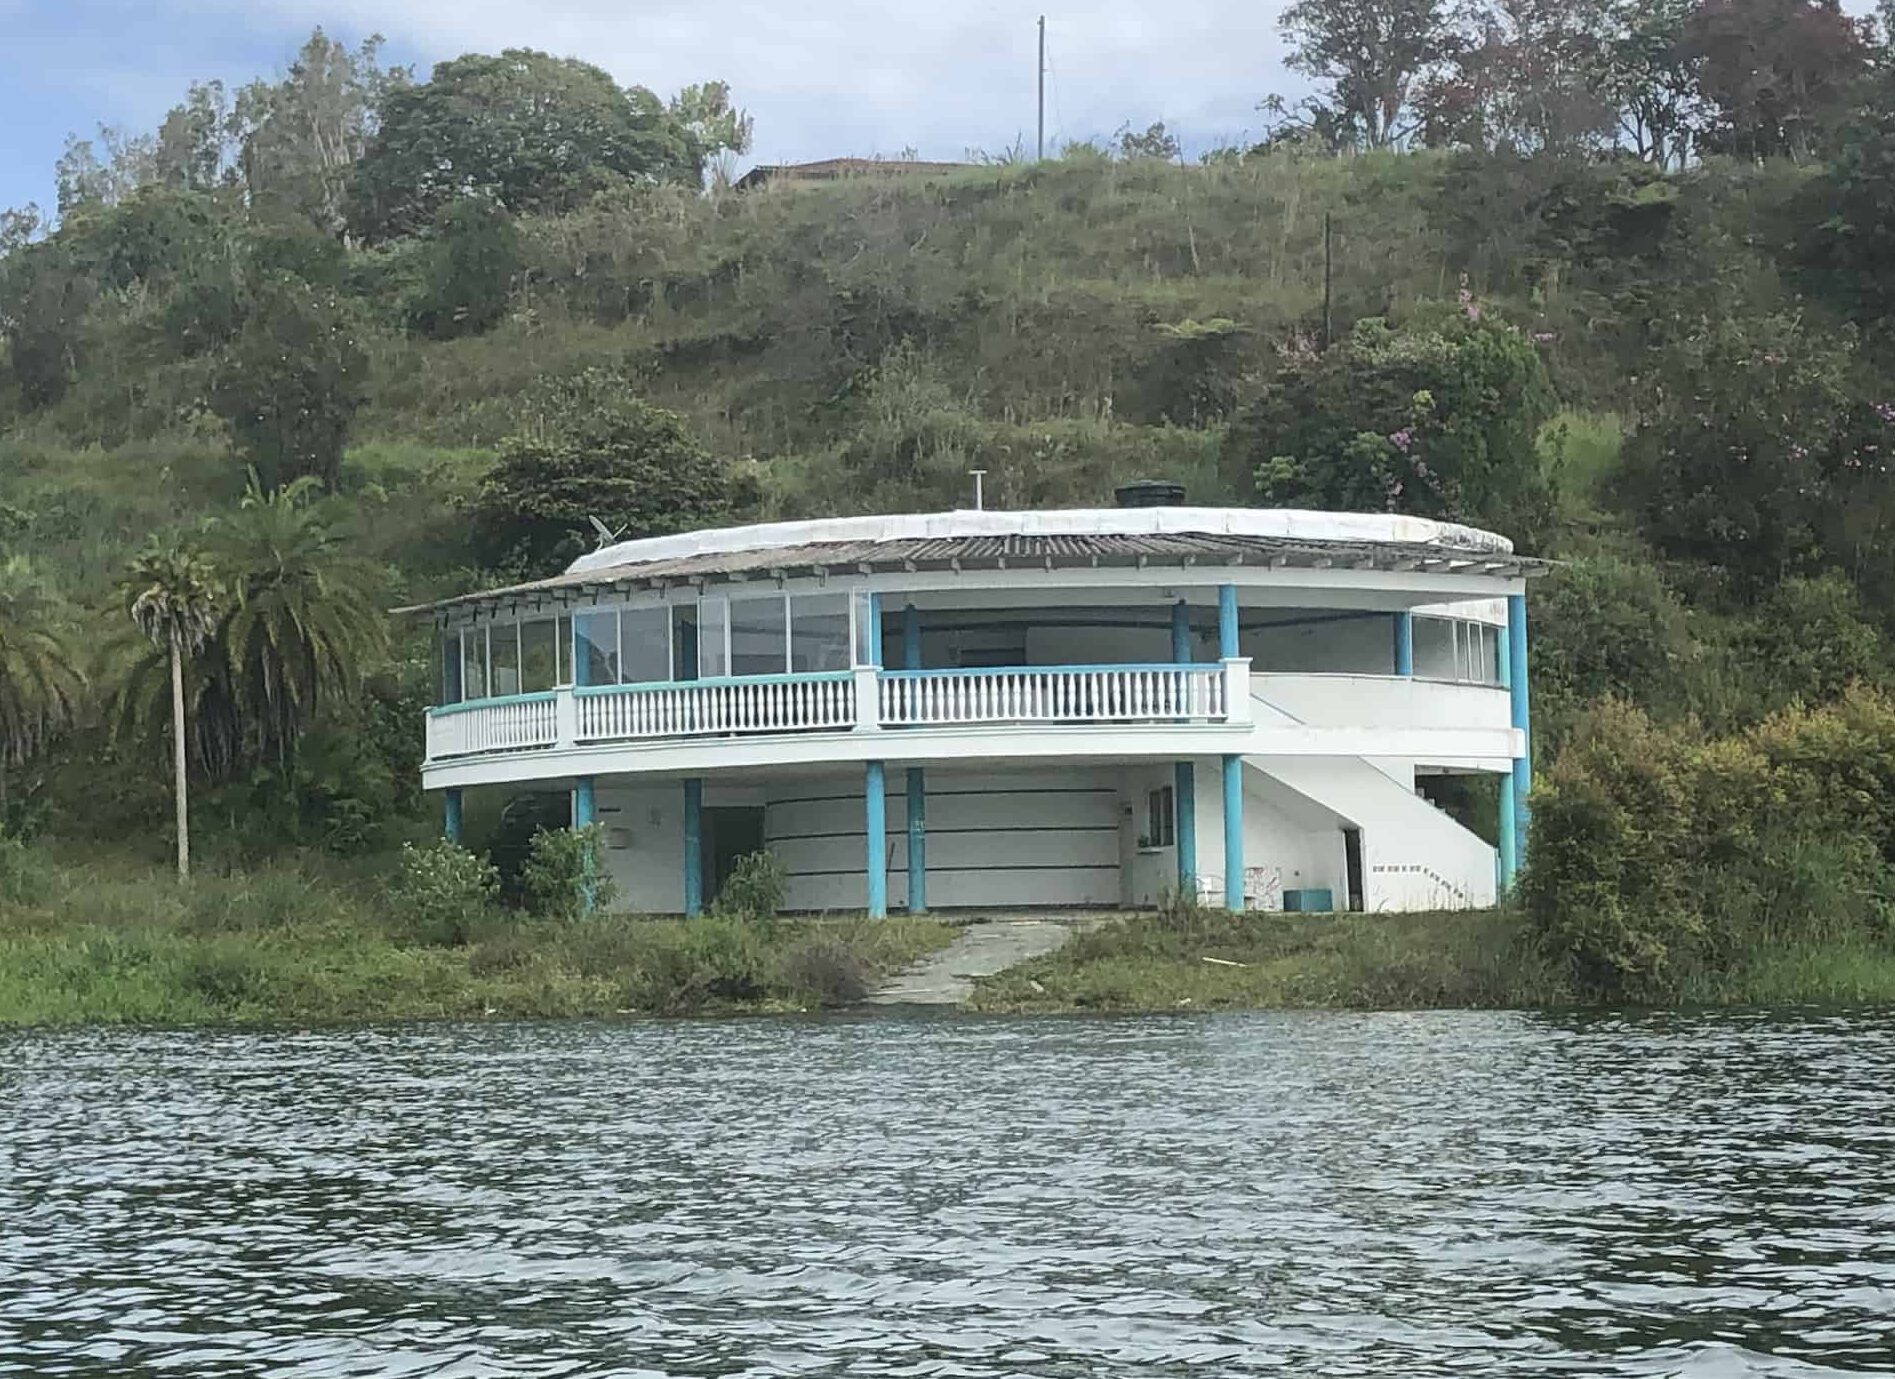 House owned by Pablo Escobar's butler